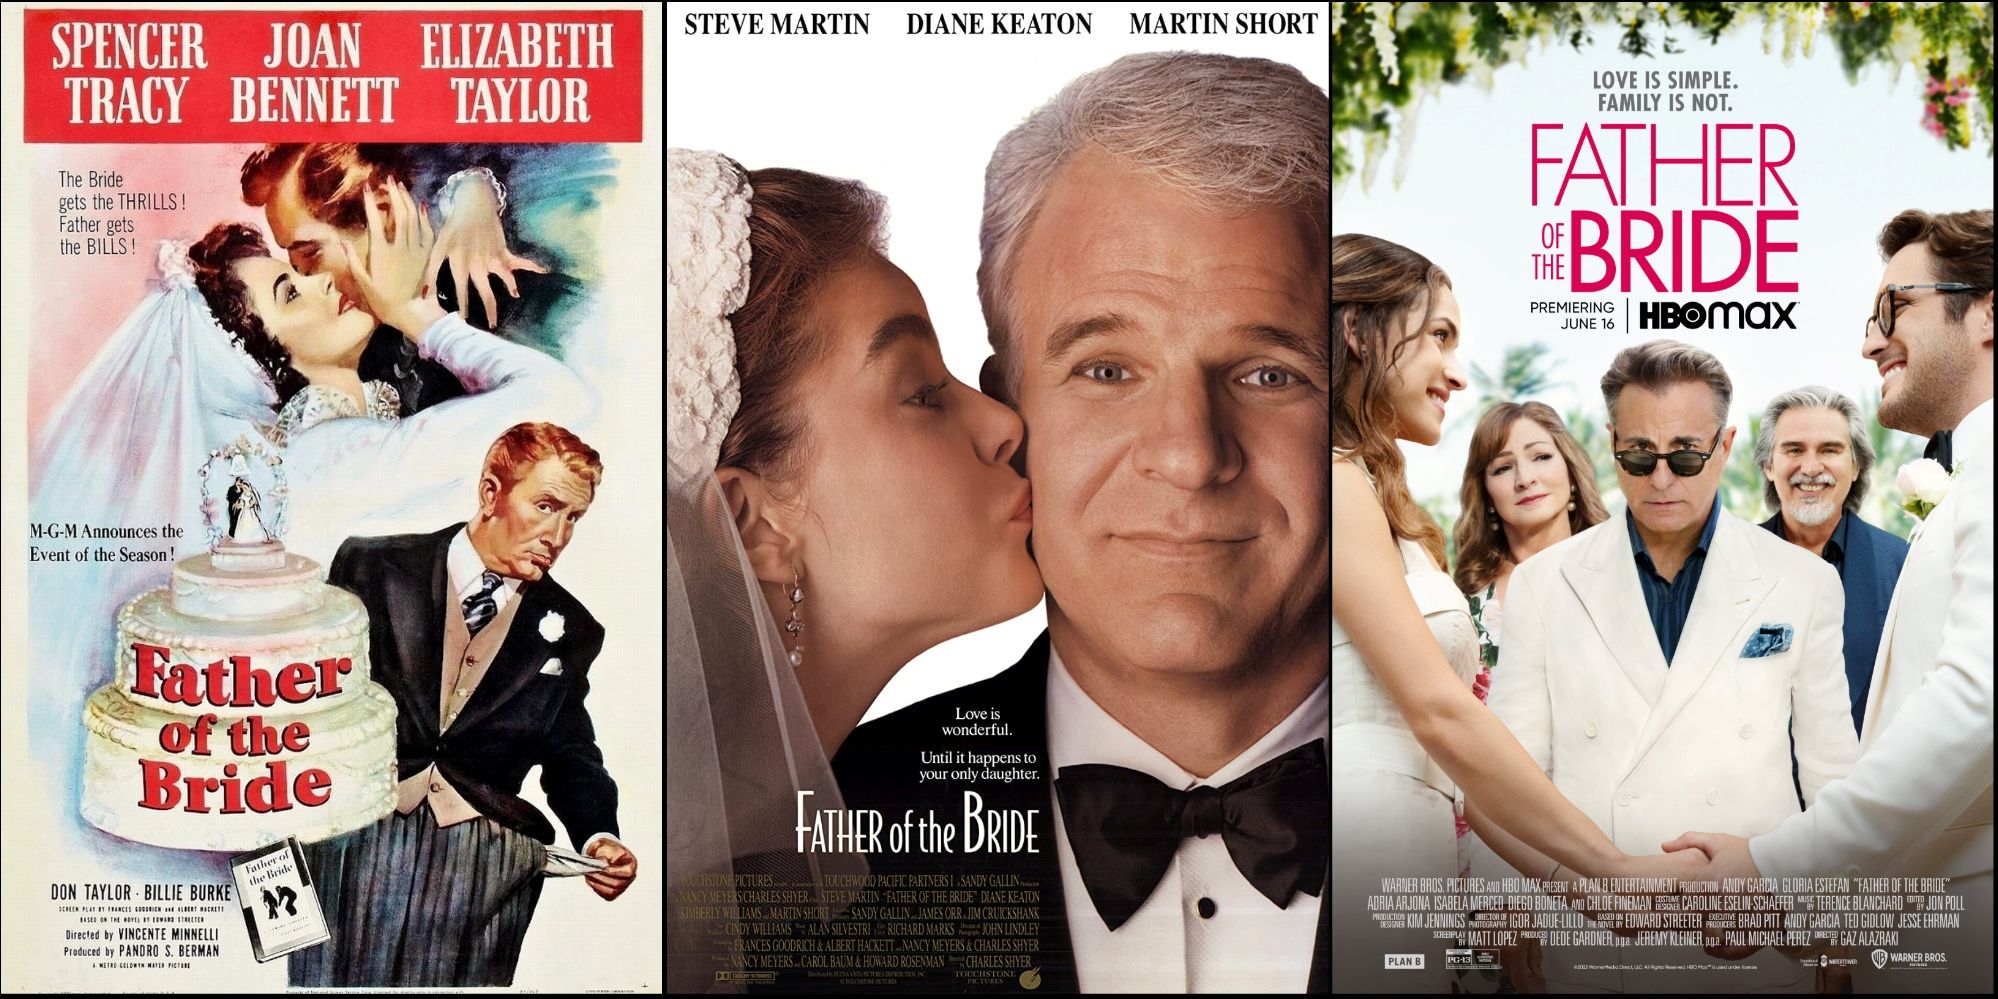 10 Cool Twitter Reactions To HBO Max’s ‘Father Of The Bride’ Remake